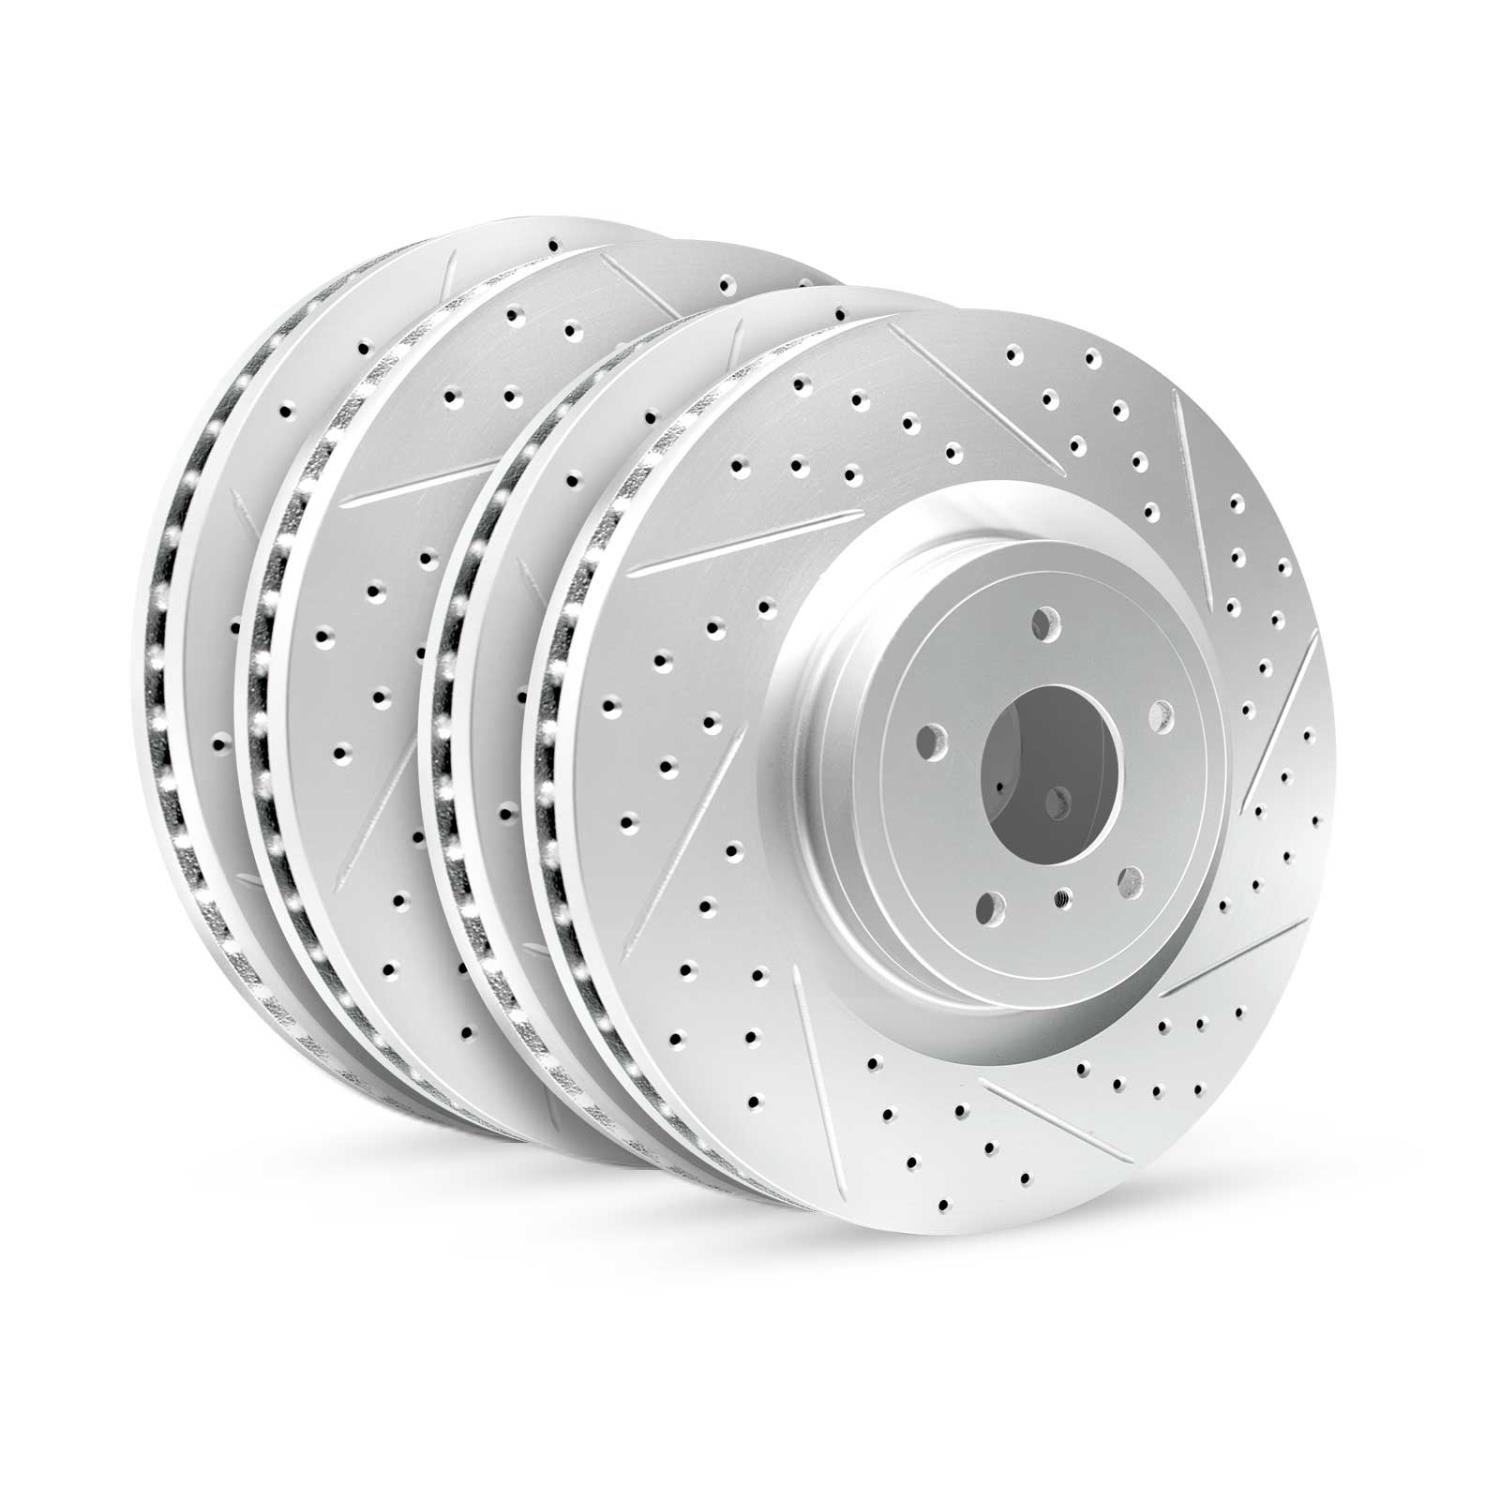 GEO-Carbon Drilled/Slotted Rotors, 2011-2014 Ford/Mazda,